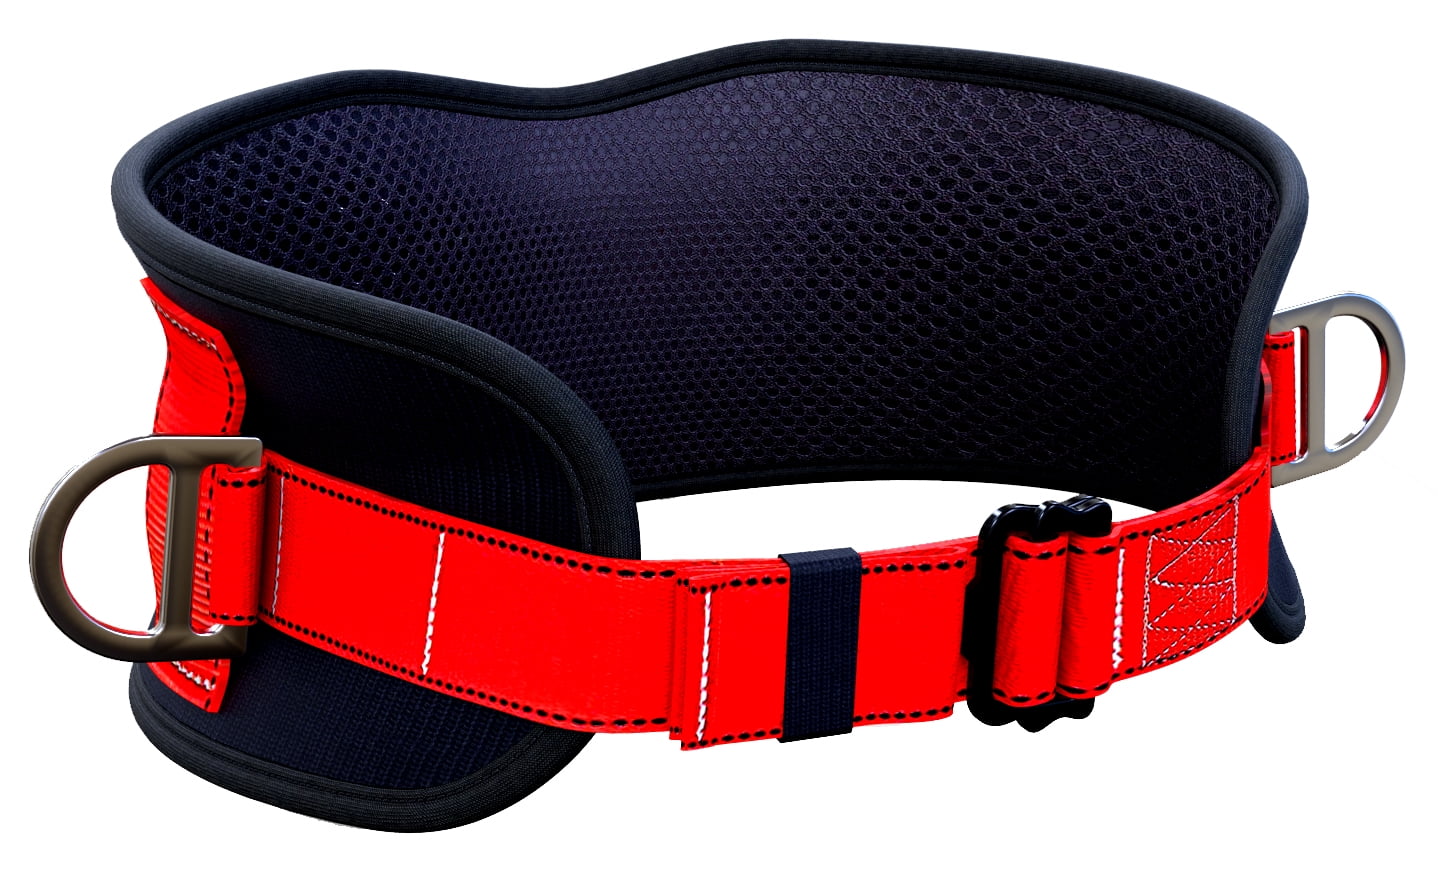 Details about   New Climbing Harnesss Safety Belt Adjustable Buckle for 1.75" Webbing 